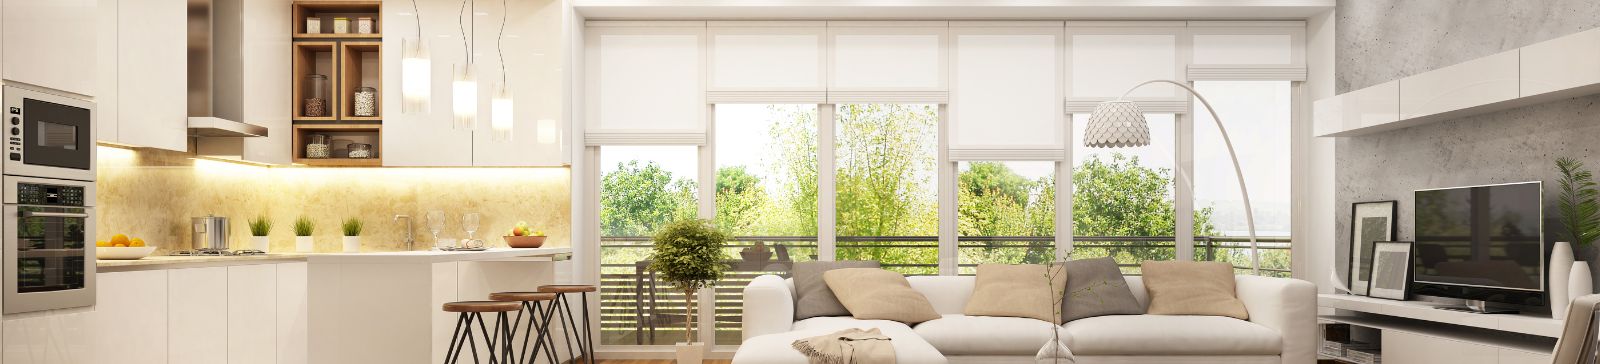 The Benefits of Motorizing Your Roller Shades for Your Home